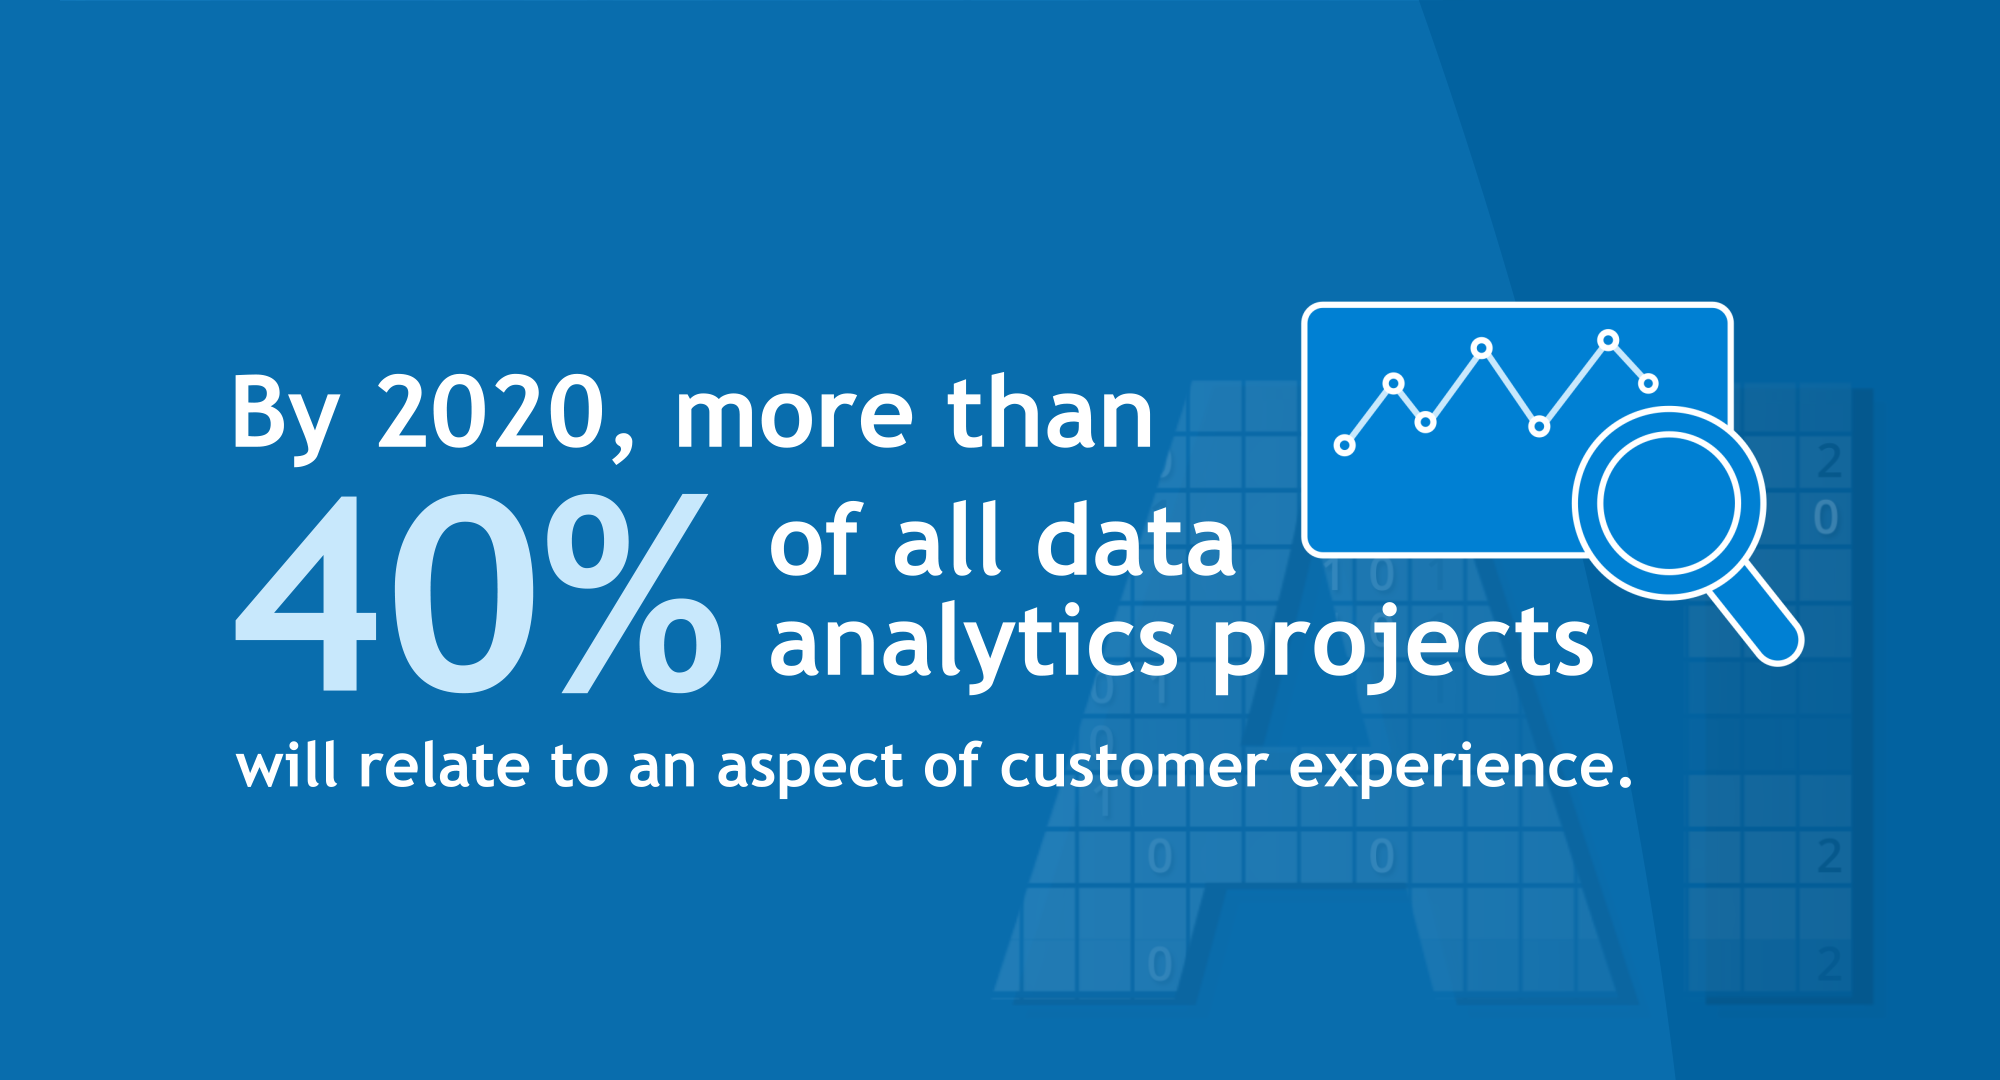 By 2020, more than 40 percent of all data analytics projects will relate to an aspect of customer experience.